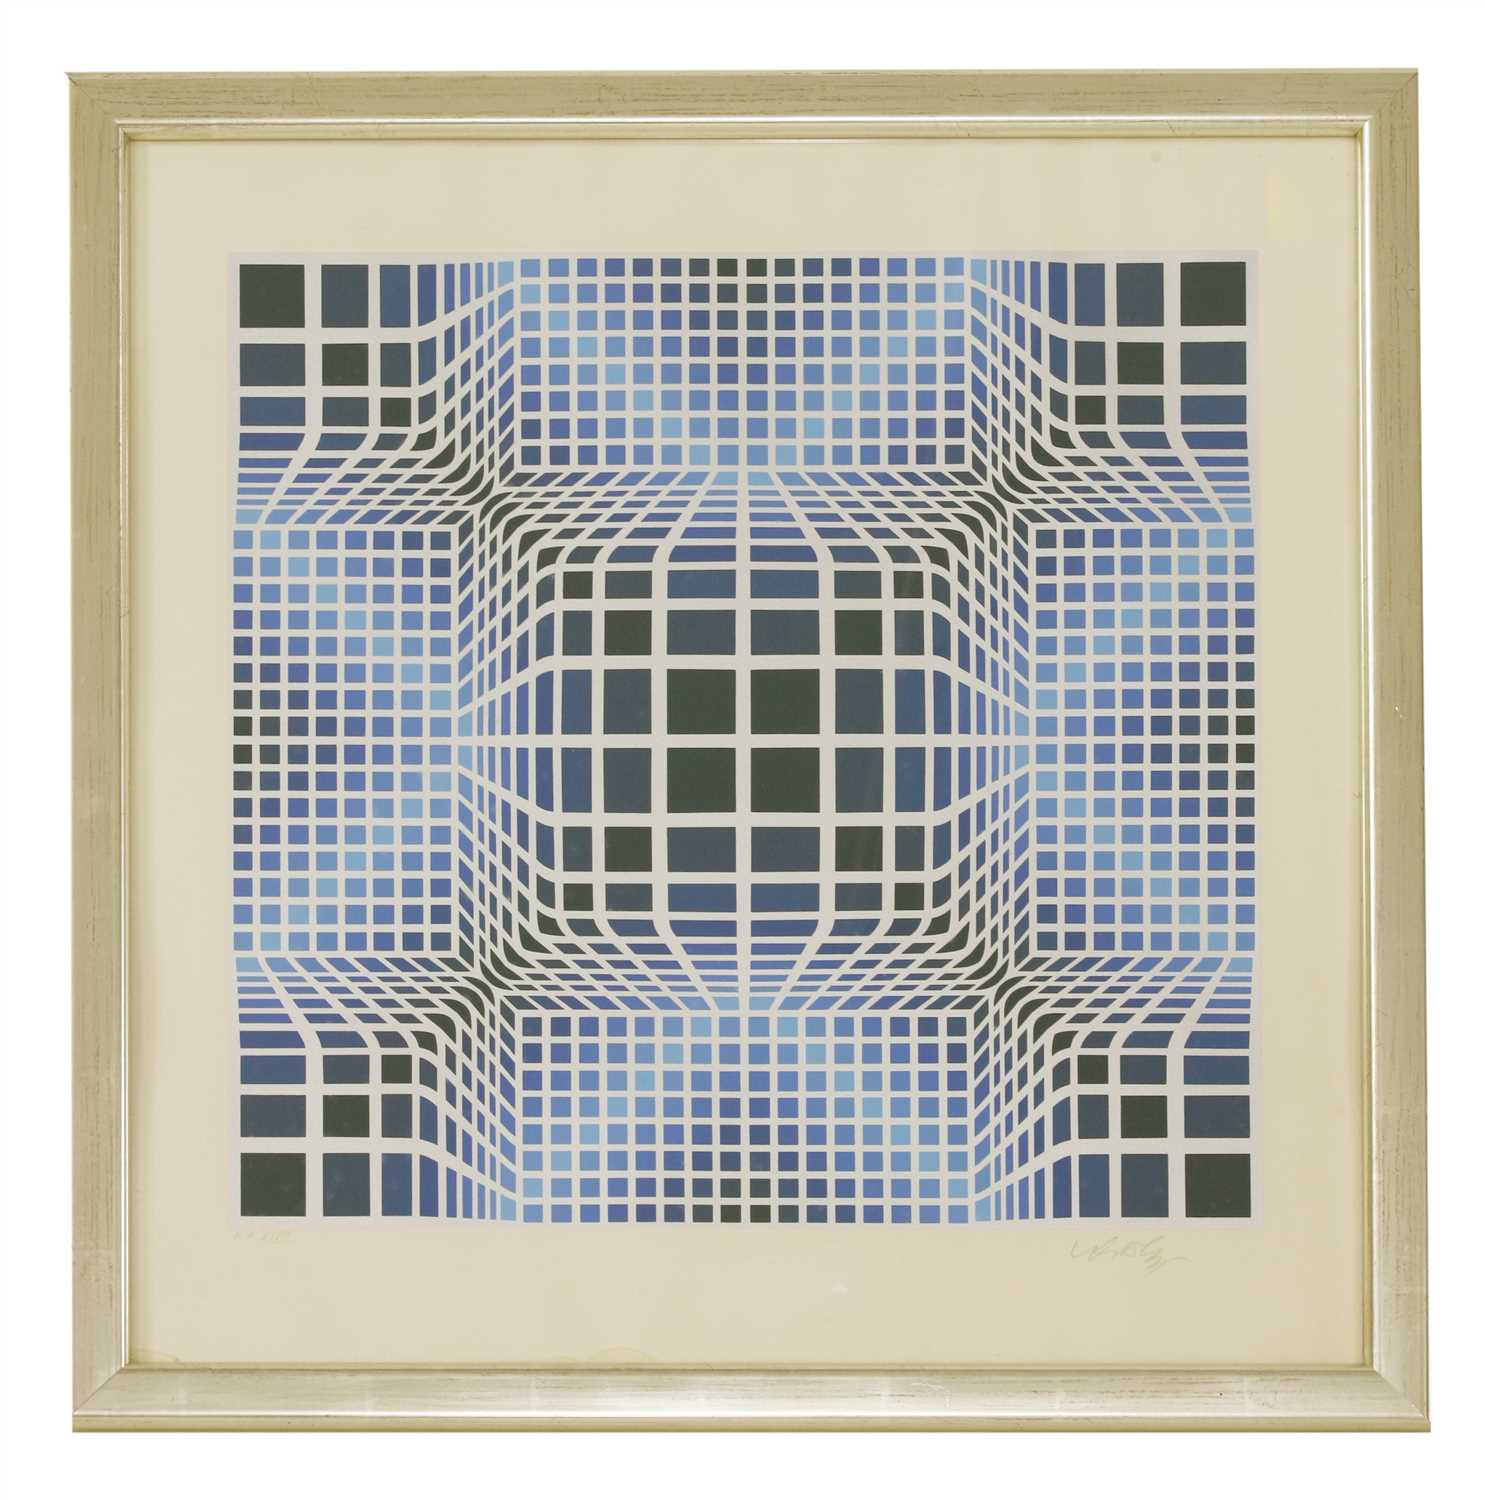 Lot 41 - *Victor Vasarely (1906-1997)